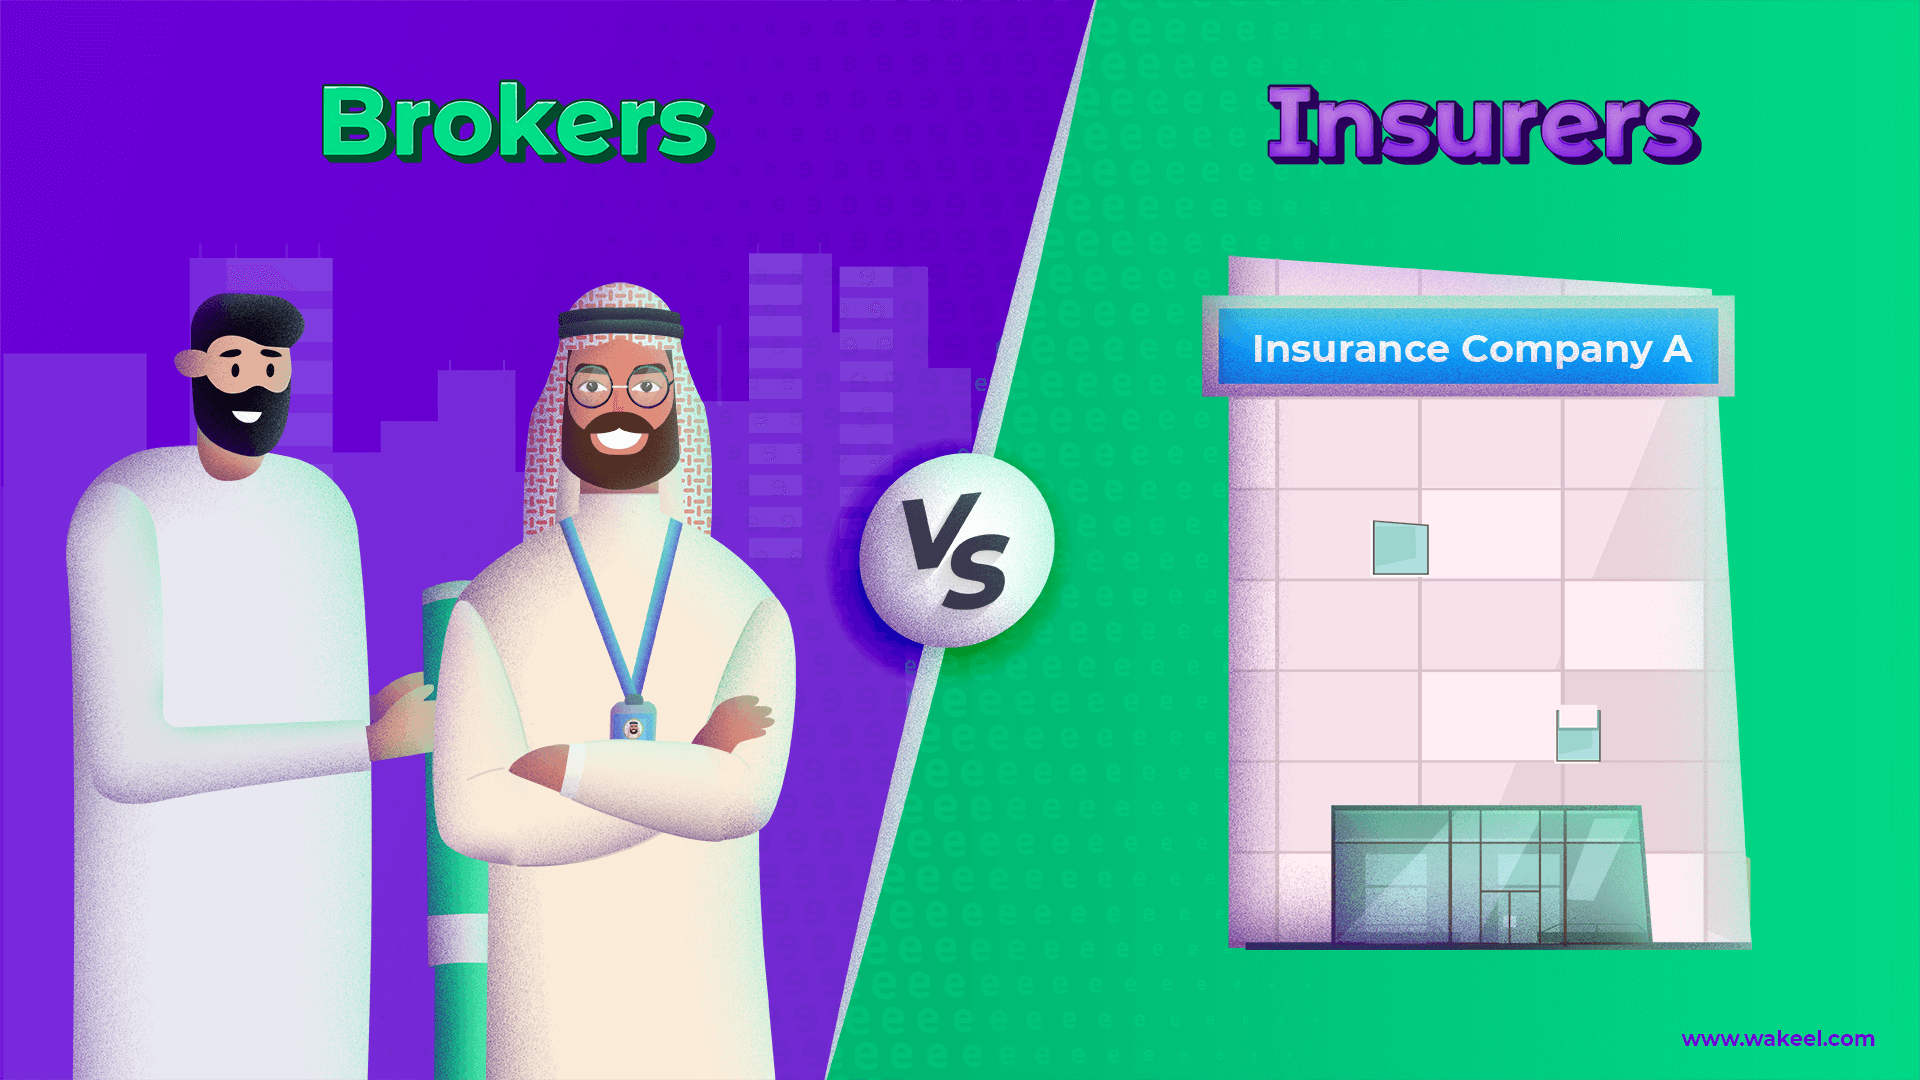 The difference between buying insurance from broker vs insurance company